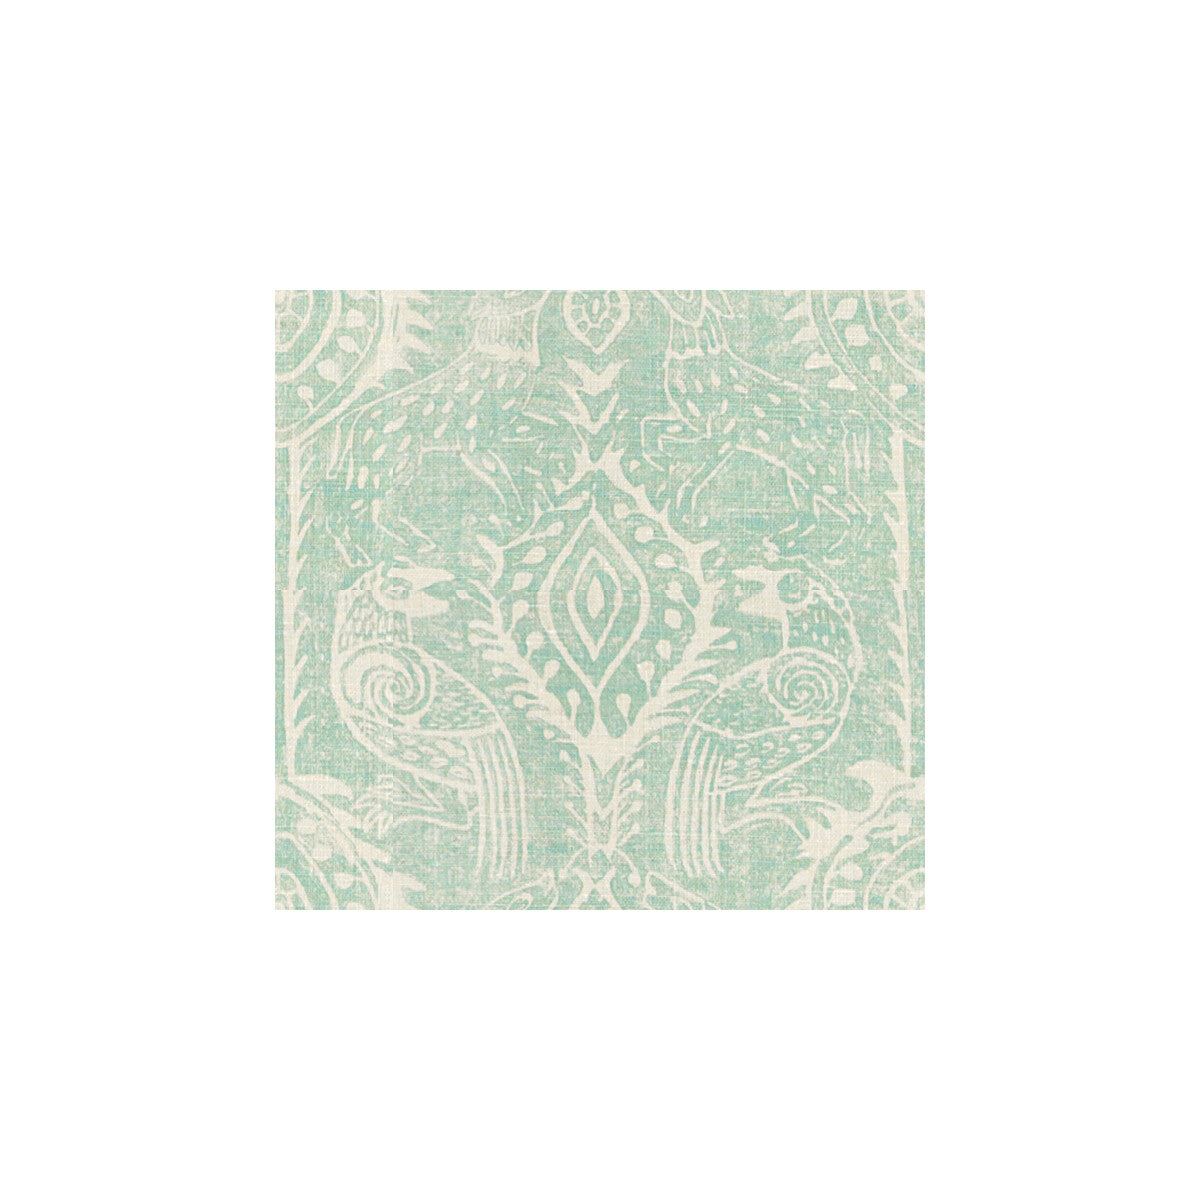 Beasties fabric in aqua color - pattern BFC-3512.13.0 - by Lee Jofa in the Blithfield collection